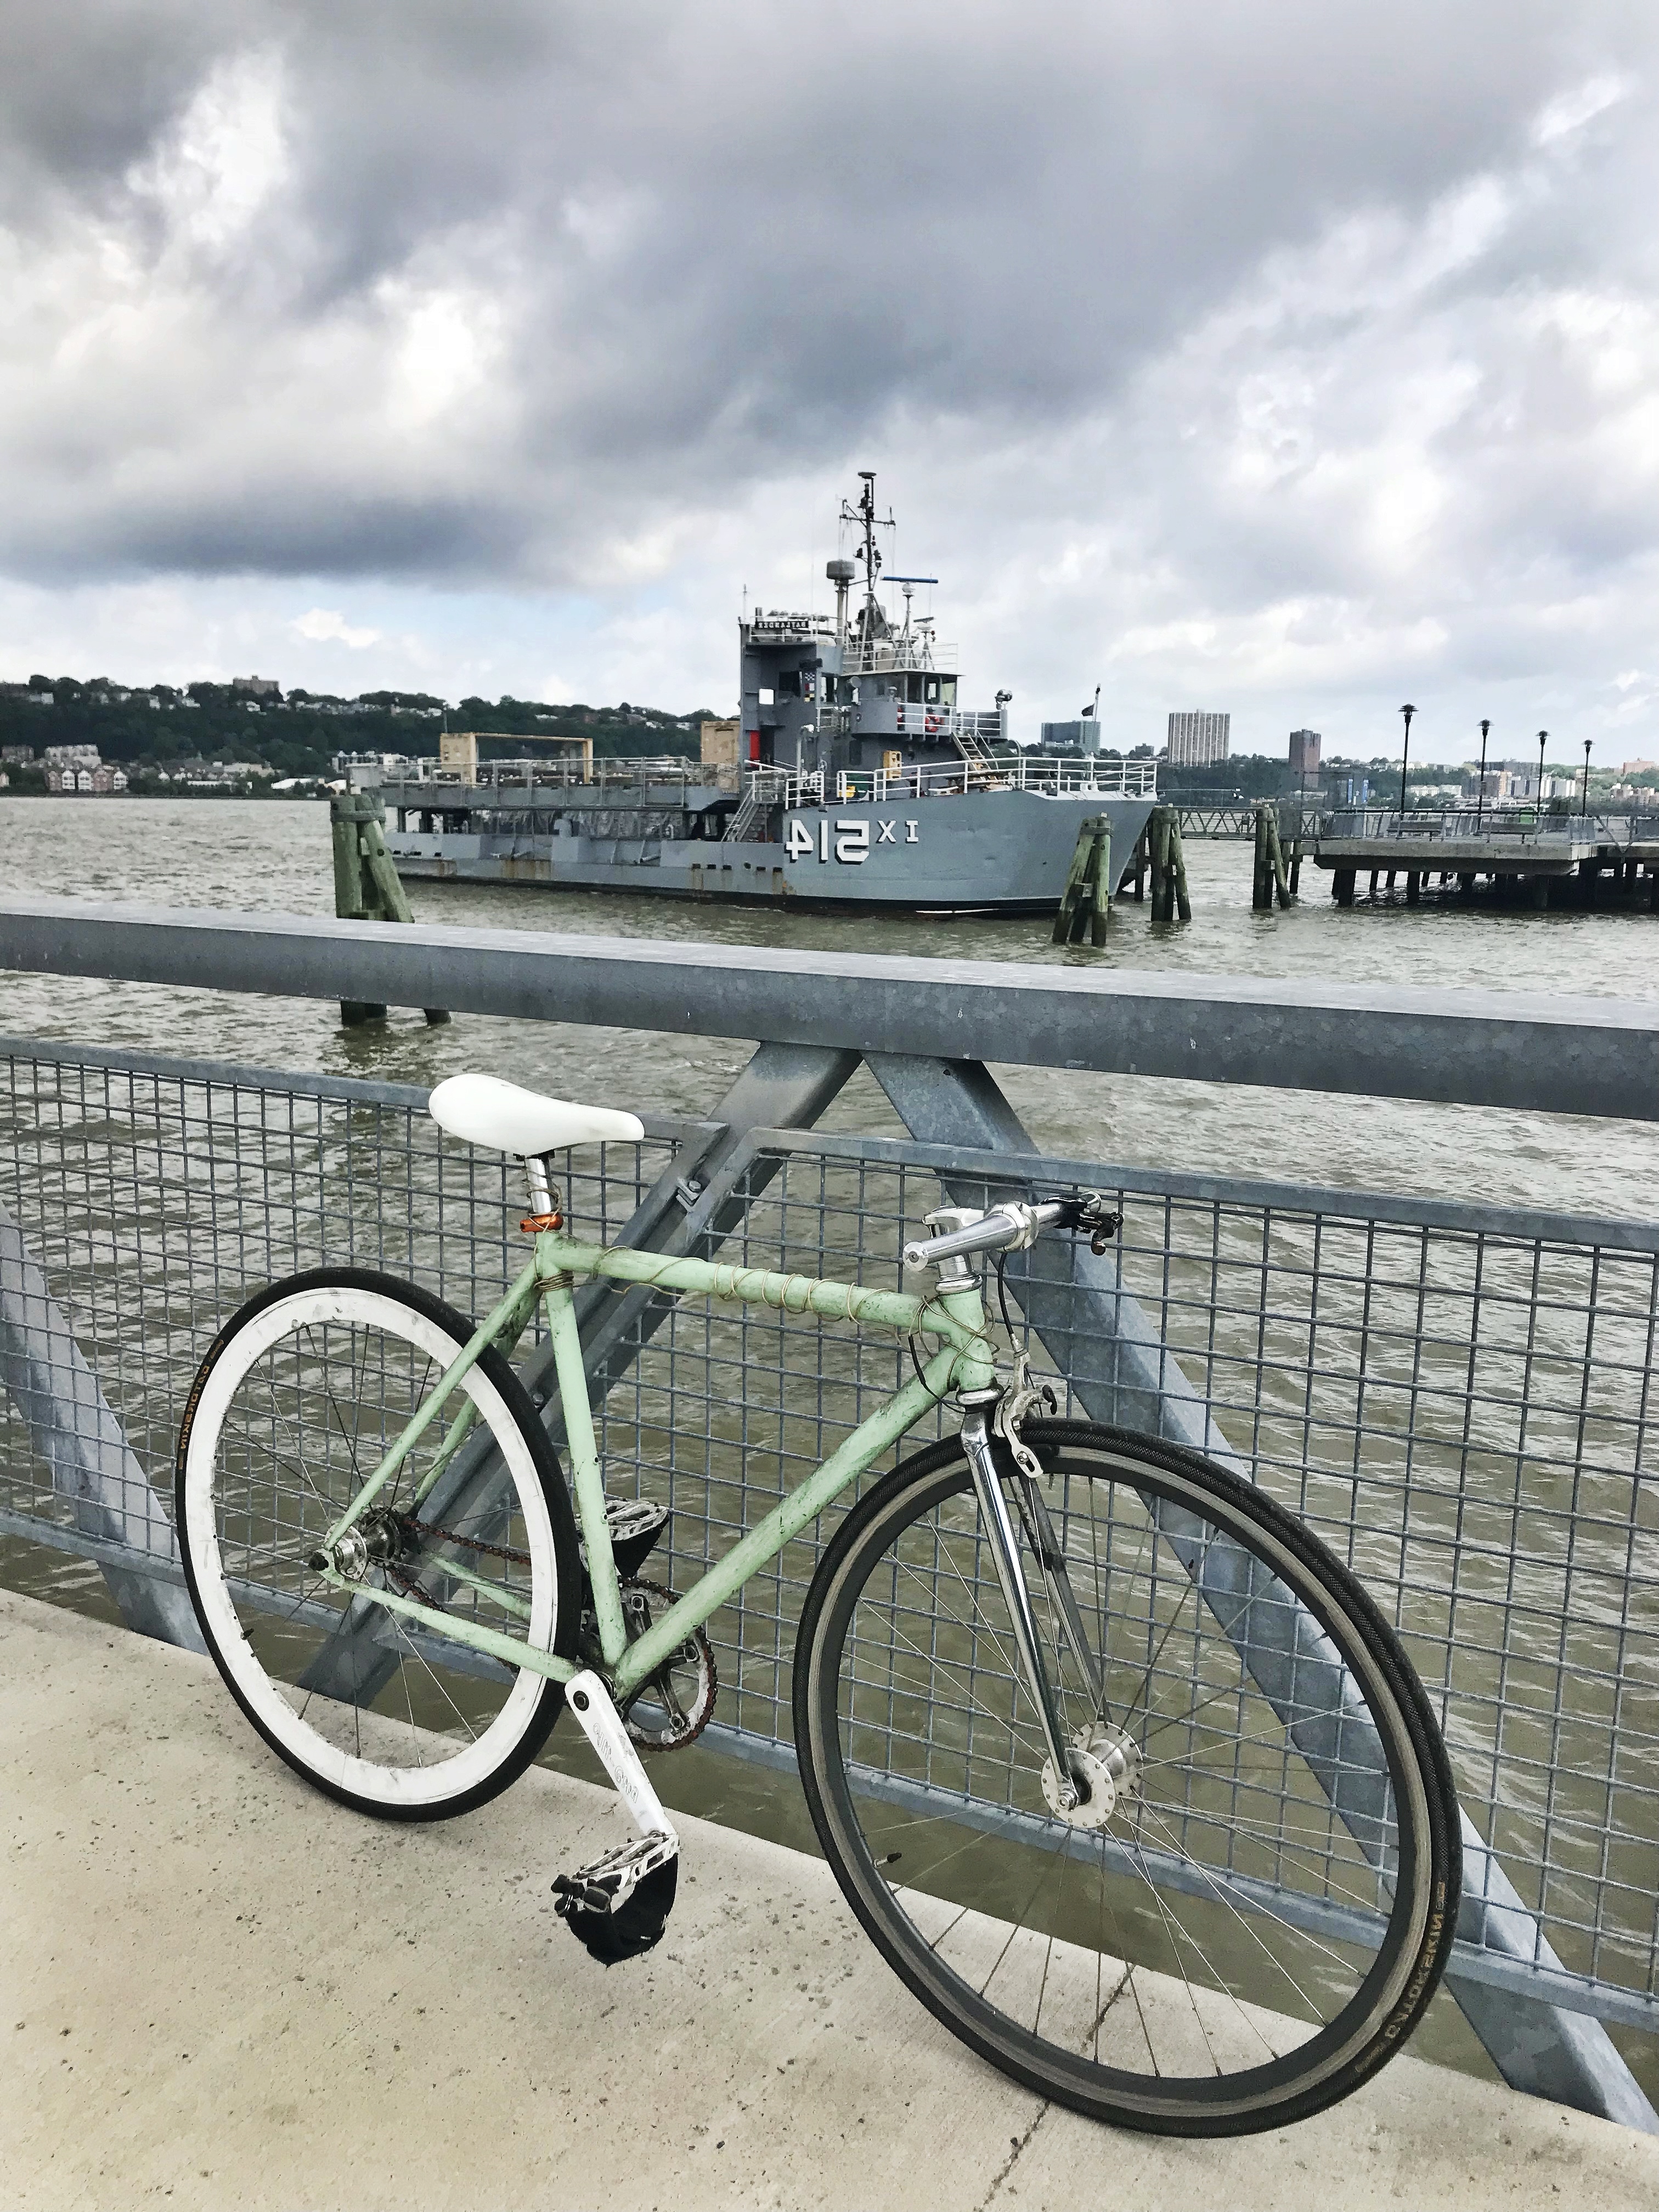 Mint green single-speed bike with hipster vibes leaning against a metal barrier, set against the Hudson River on a gloomy day